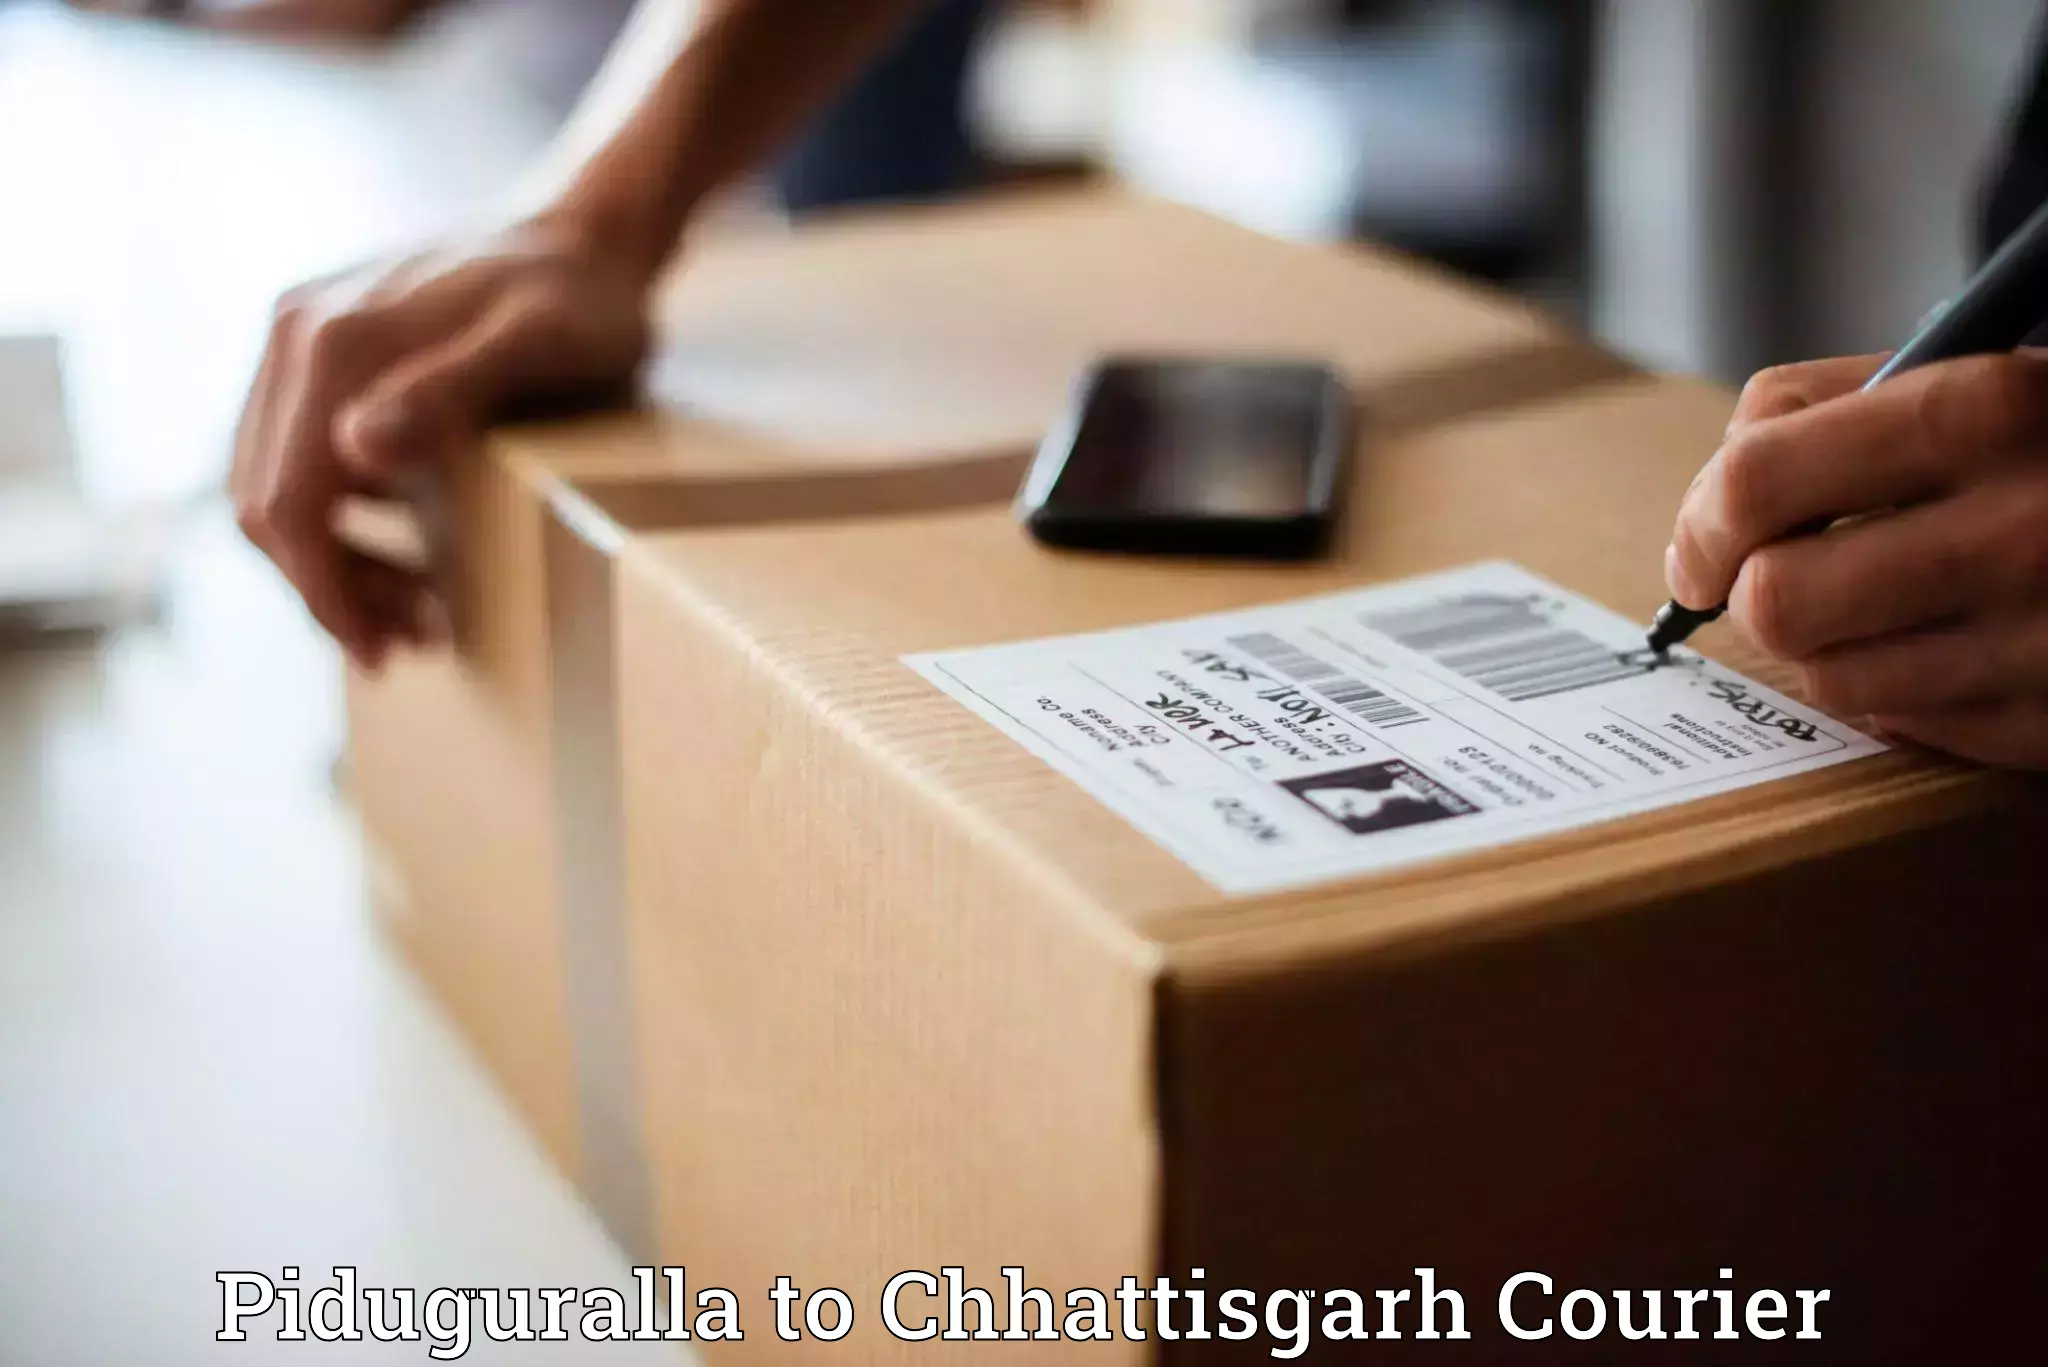 Fast shipping solutions in Piduguralla to Raigarh